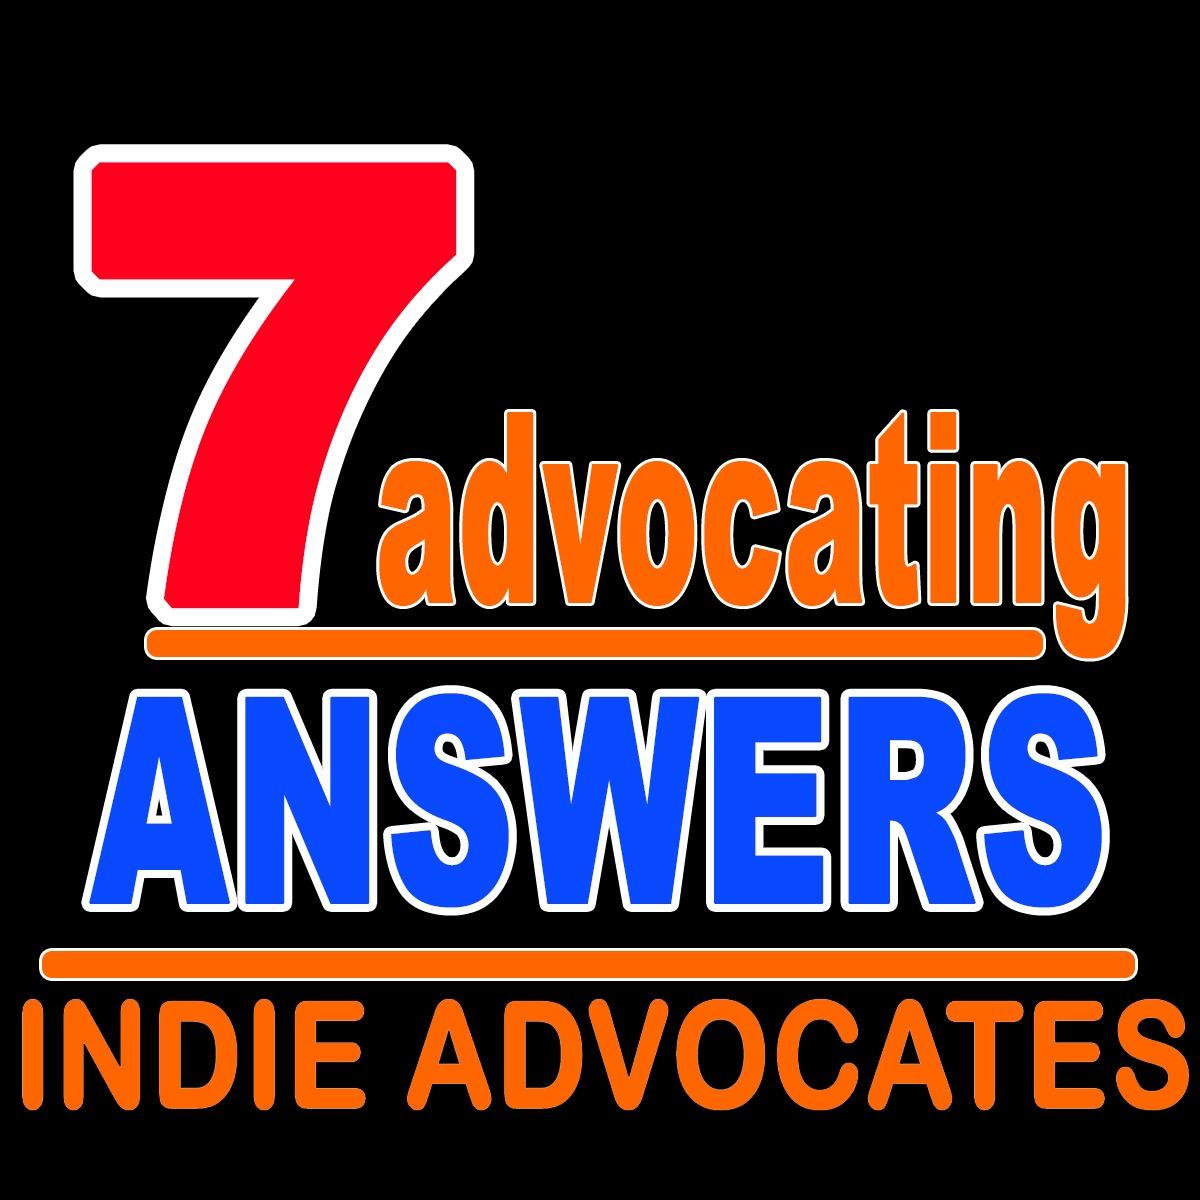 7  Questions and to Create 7 Advocating Answers  .  .  .